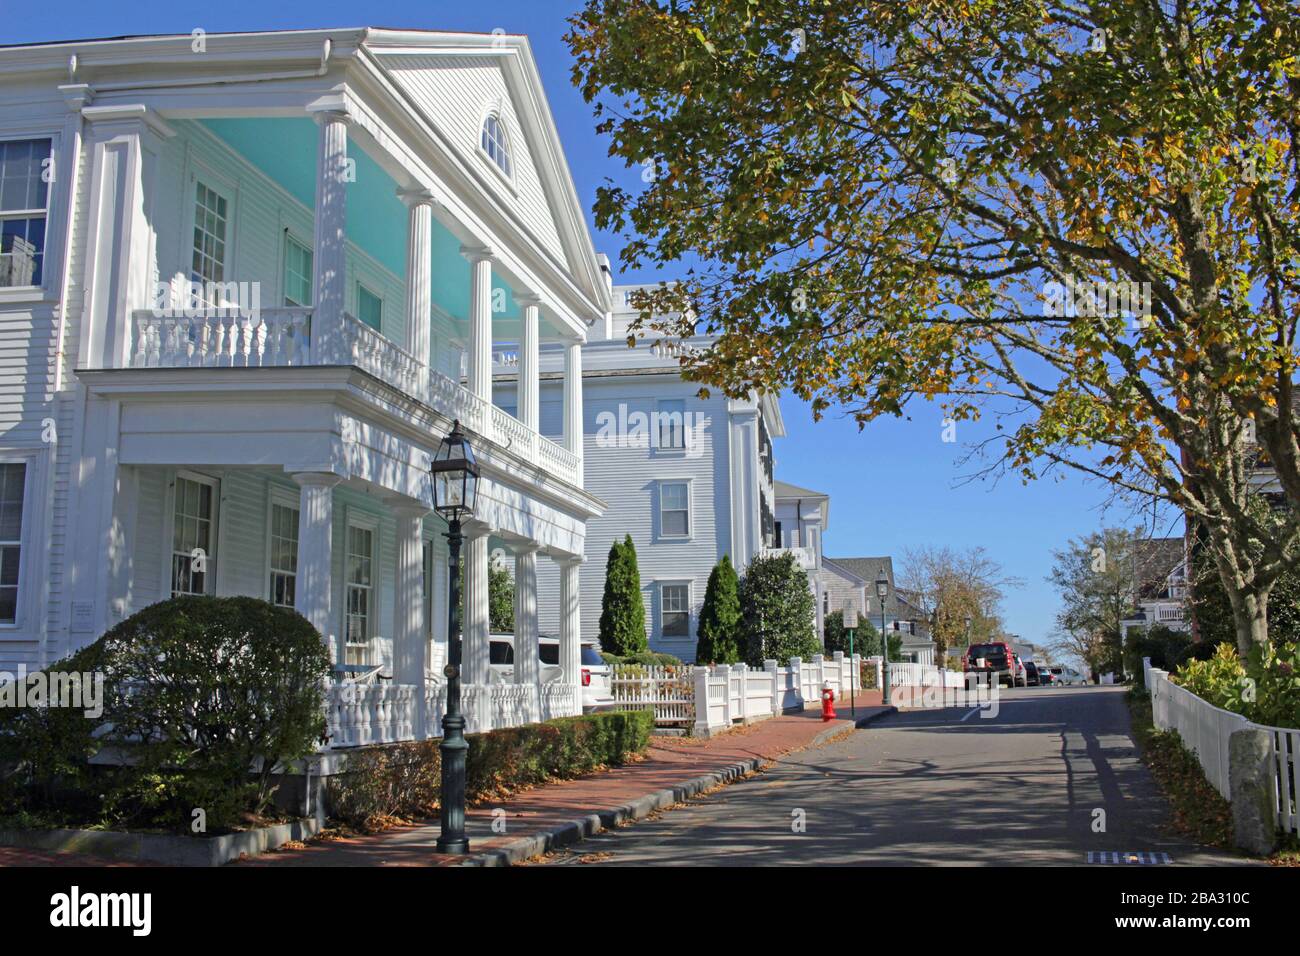 Captain Morse House in foreground, and homes along N Water St, Edgartown, Martha’s Vineyard, Massachusetts, USA Stock Photo